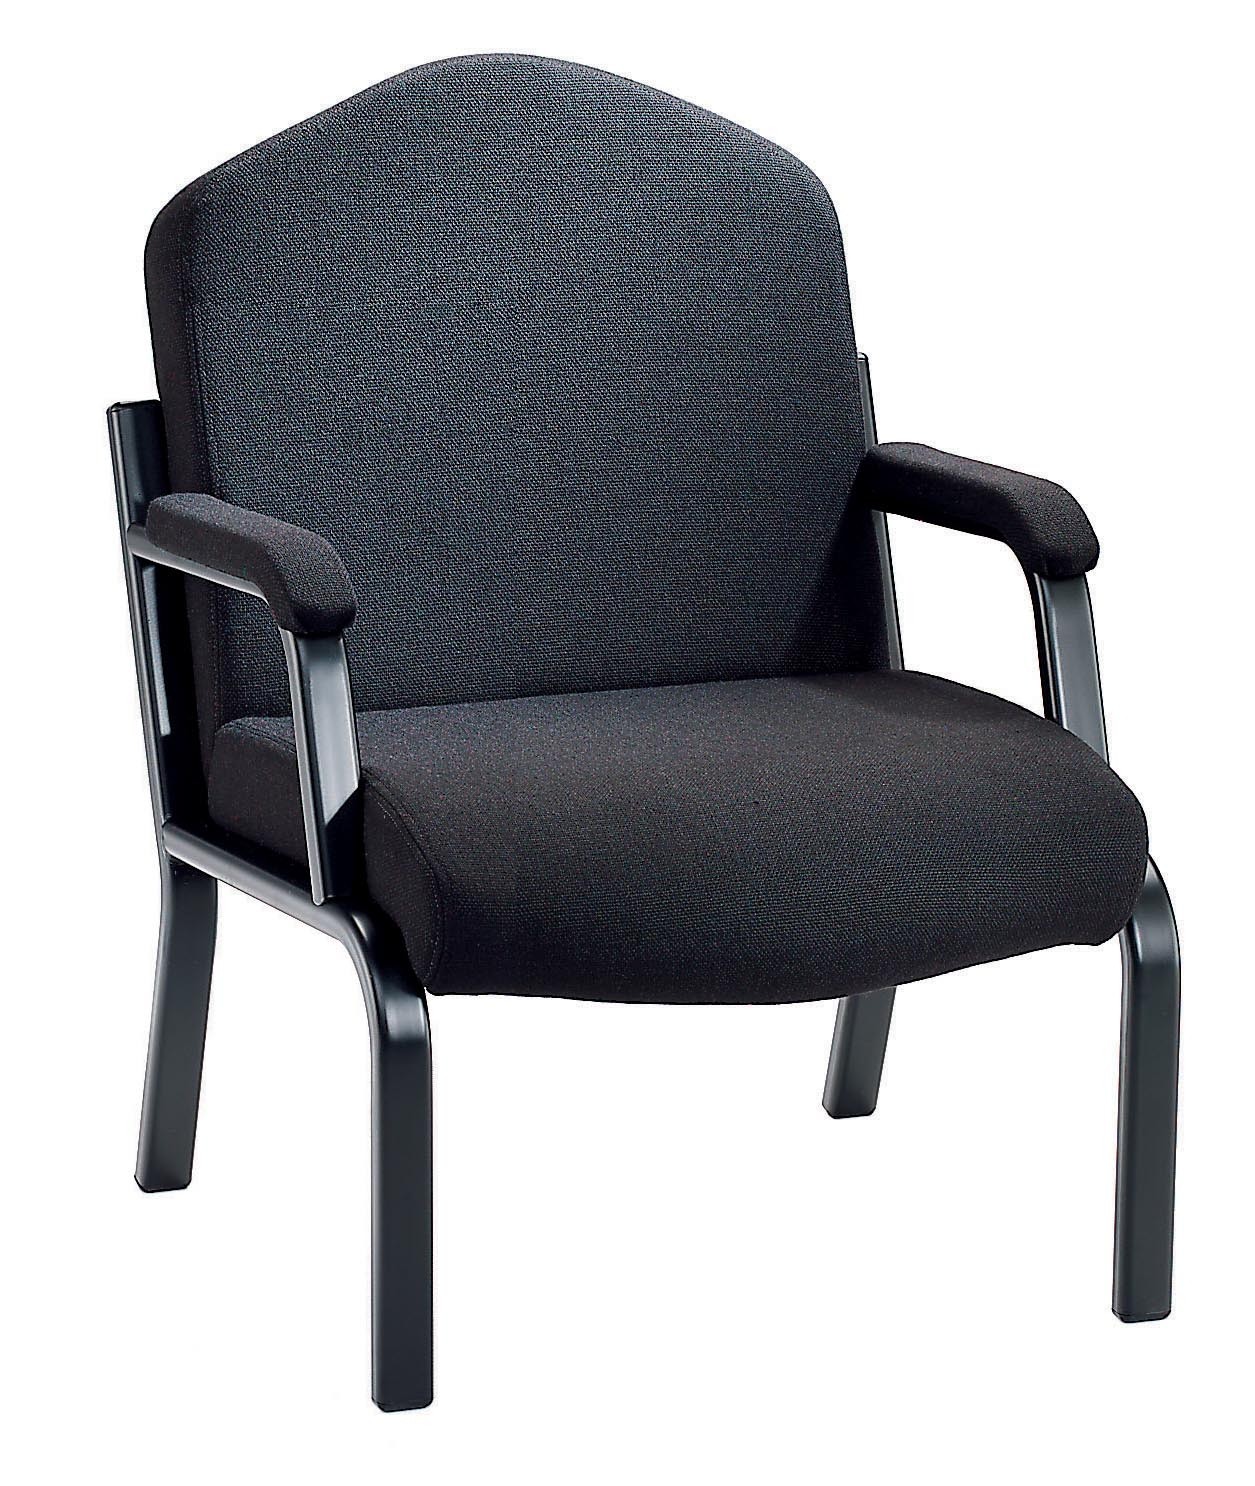 Heavy duty visitor chairs 1